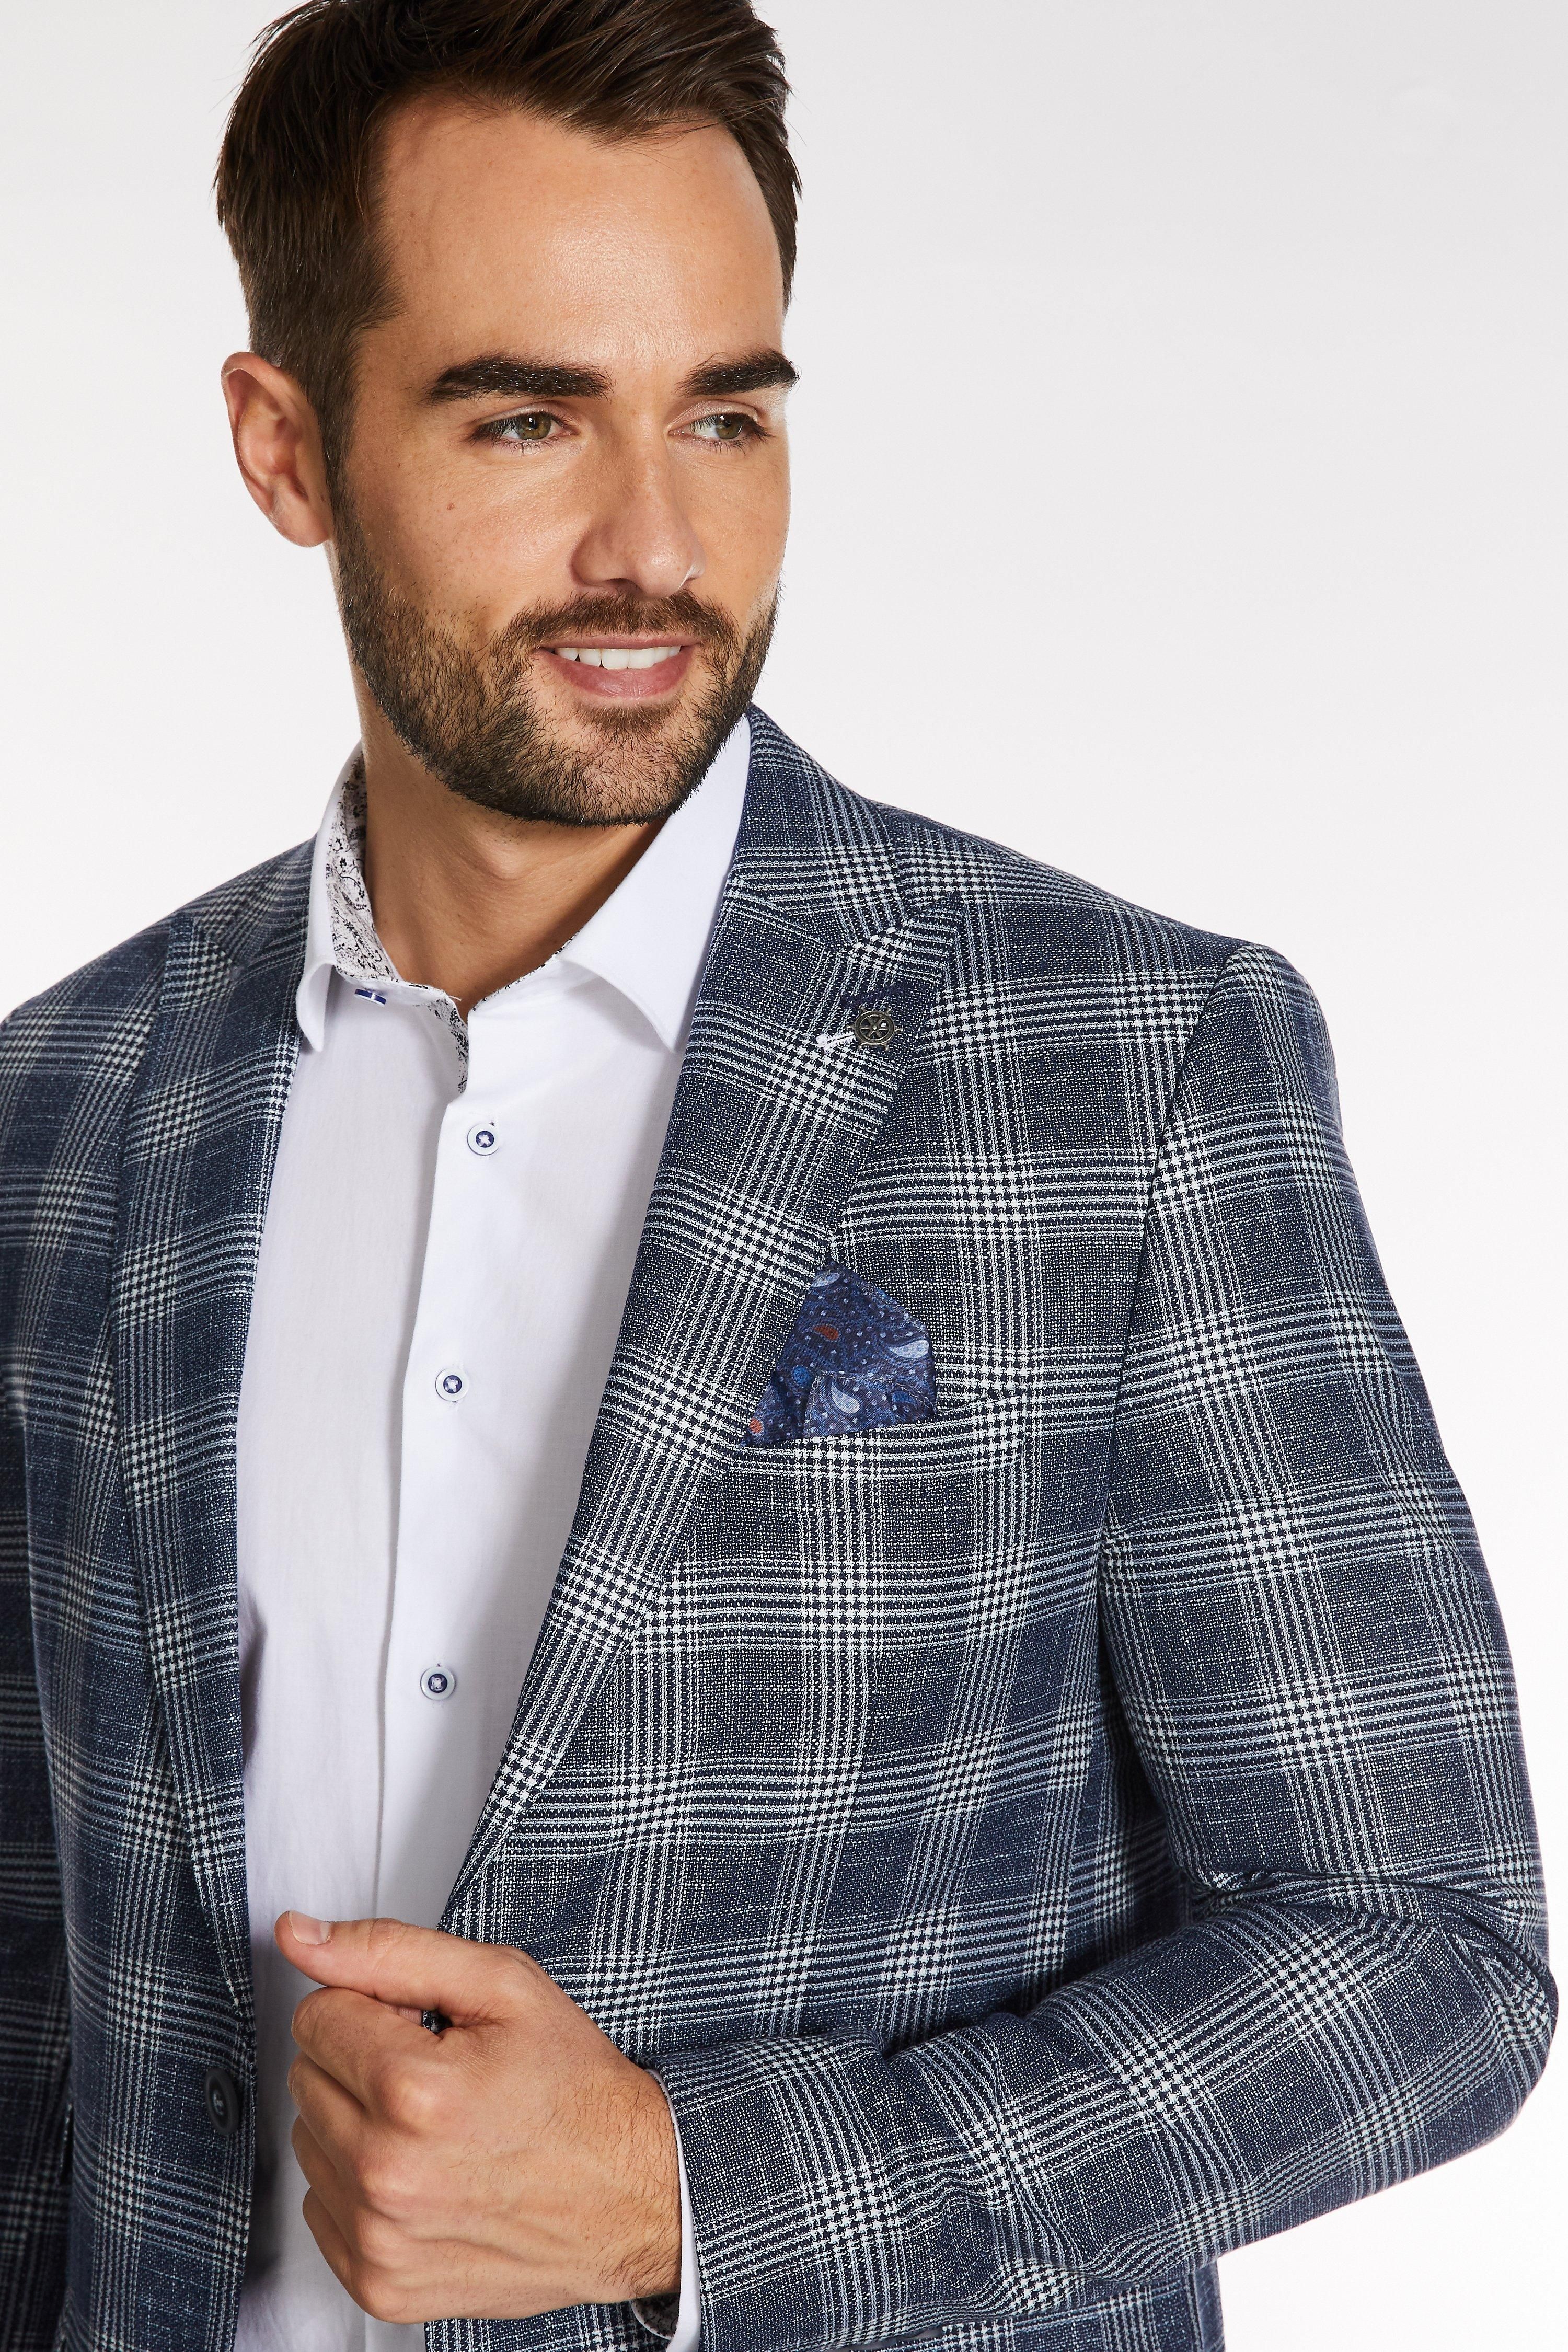 Check Design  	Peaked Lapel  	Chest Pocket with Square  	Paisley Printed Detail Lining  	Internal Pockets  	Fuctional Side Pockets and Accent Pocket  	Double Vented Back  	2 Button Fastening